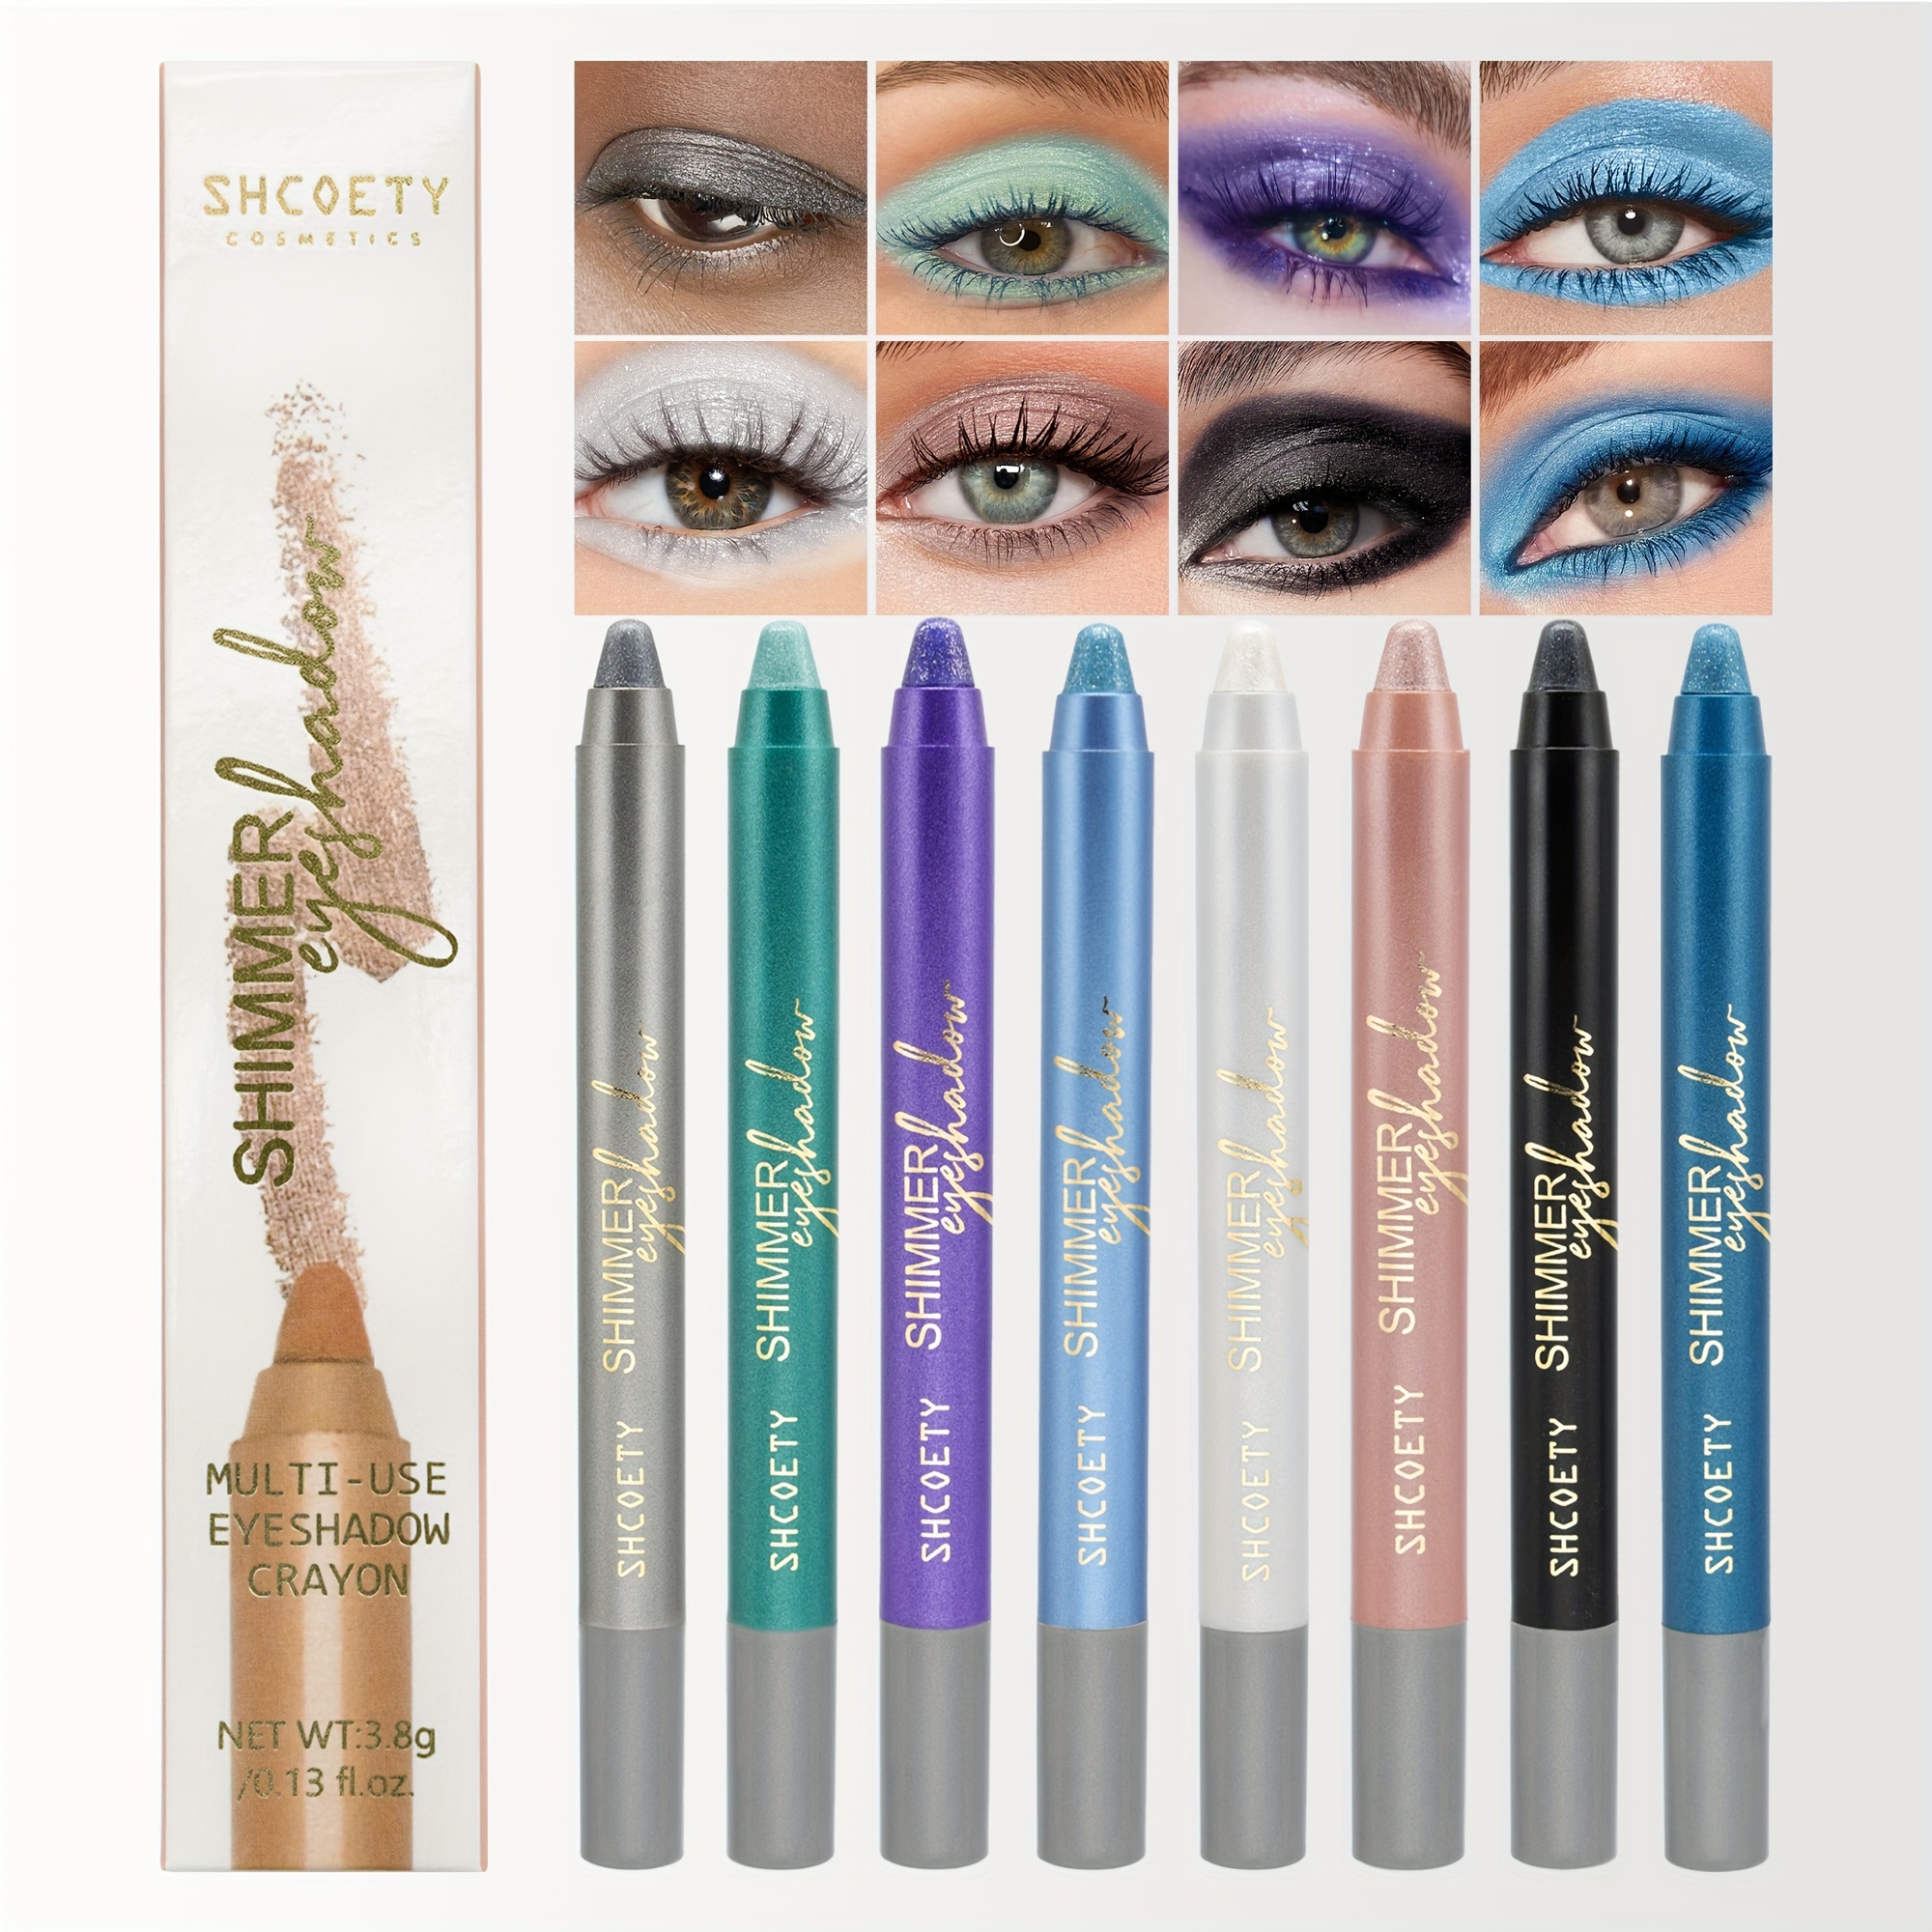 

8 Colors Eyelid Under Crease Pen, Highlighting Eyeshadow Pen, Pearly Glitter And Matte Finish, Easy Coloring Eye Makeup Pencils